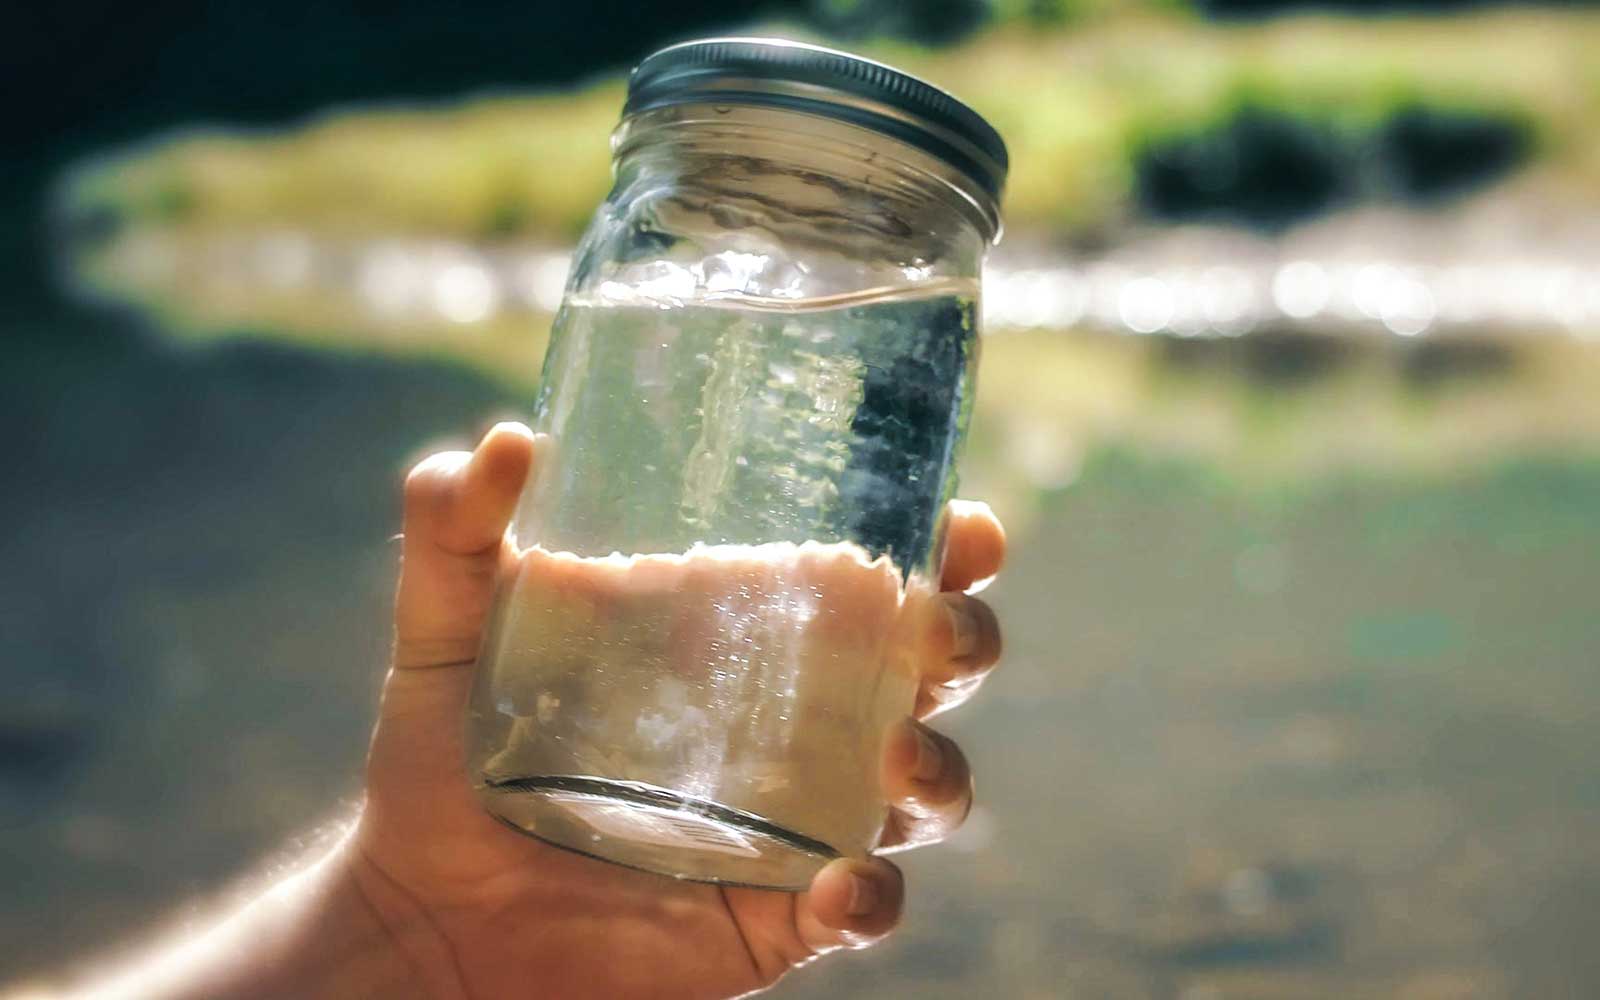 A mason jar full of white liquor distilled in Hochatown, Oklahoma from the waters of the Lower Mountain Fork River